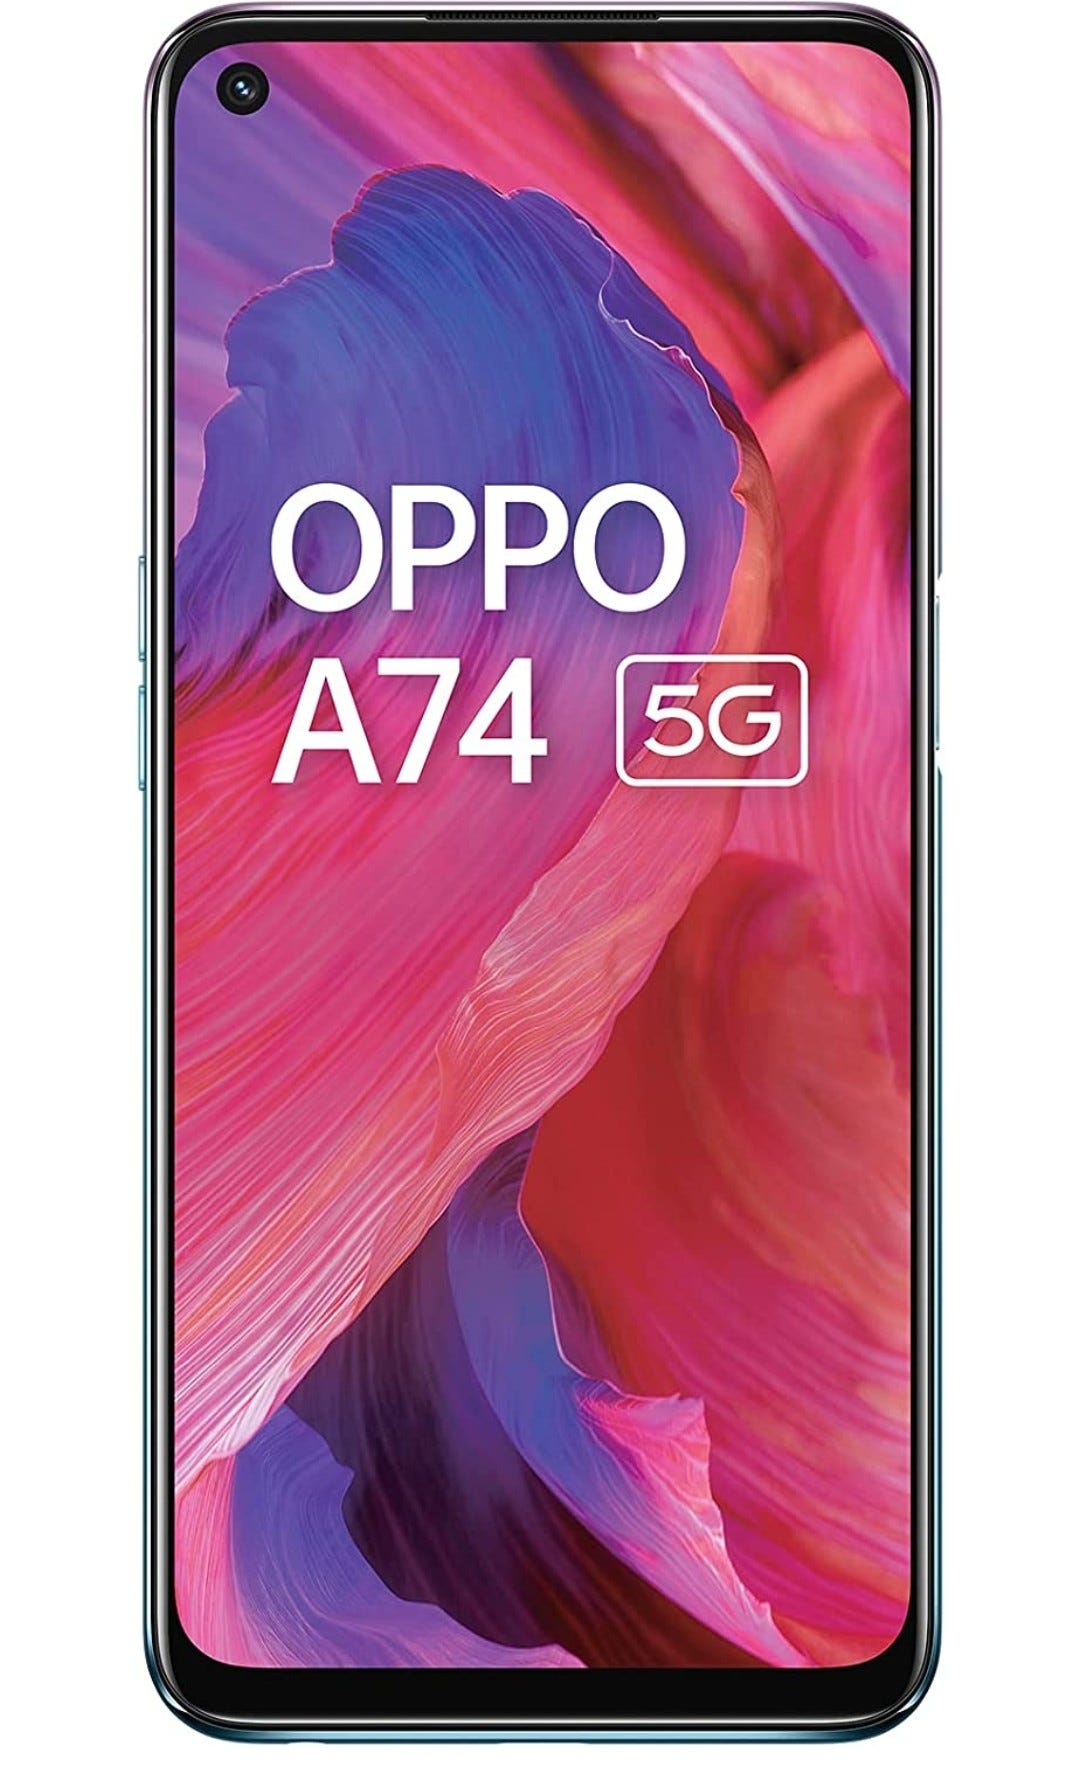 OPPO A74 5G (Fluid Black,6GB RAM,128GB Storage) - 5G Android Smartphone, 5000 mAh Battery, 18W Fast Charge